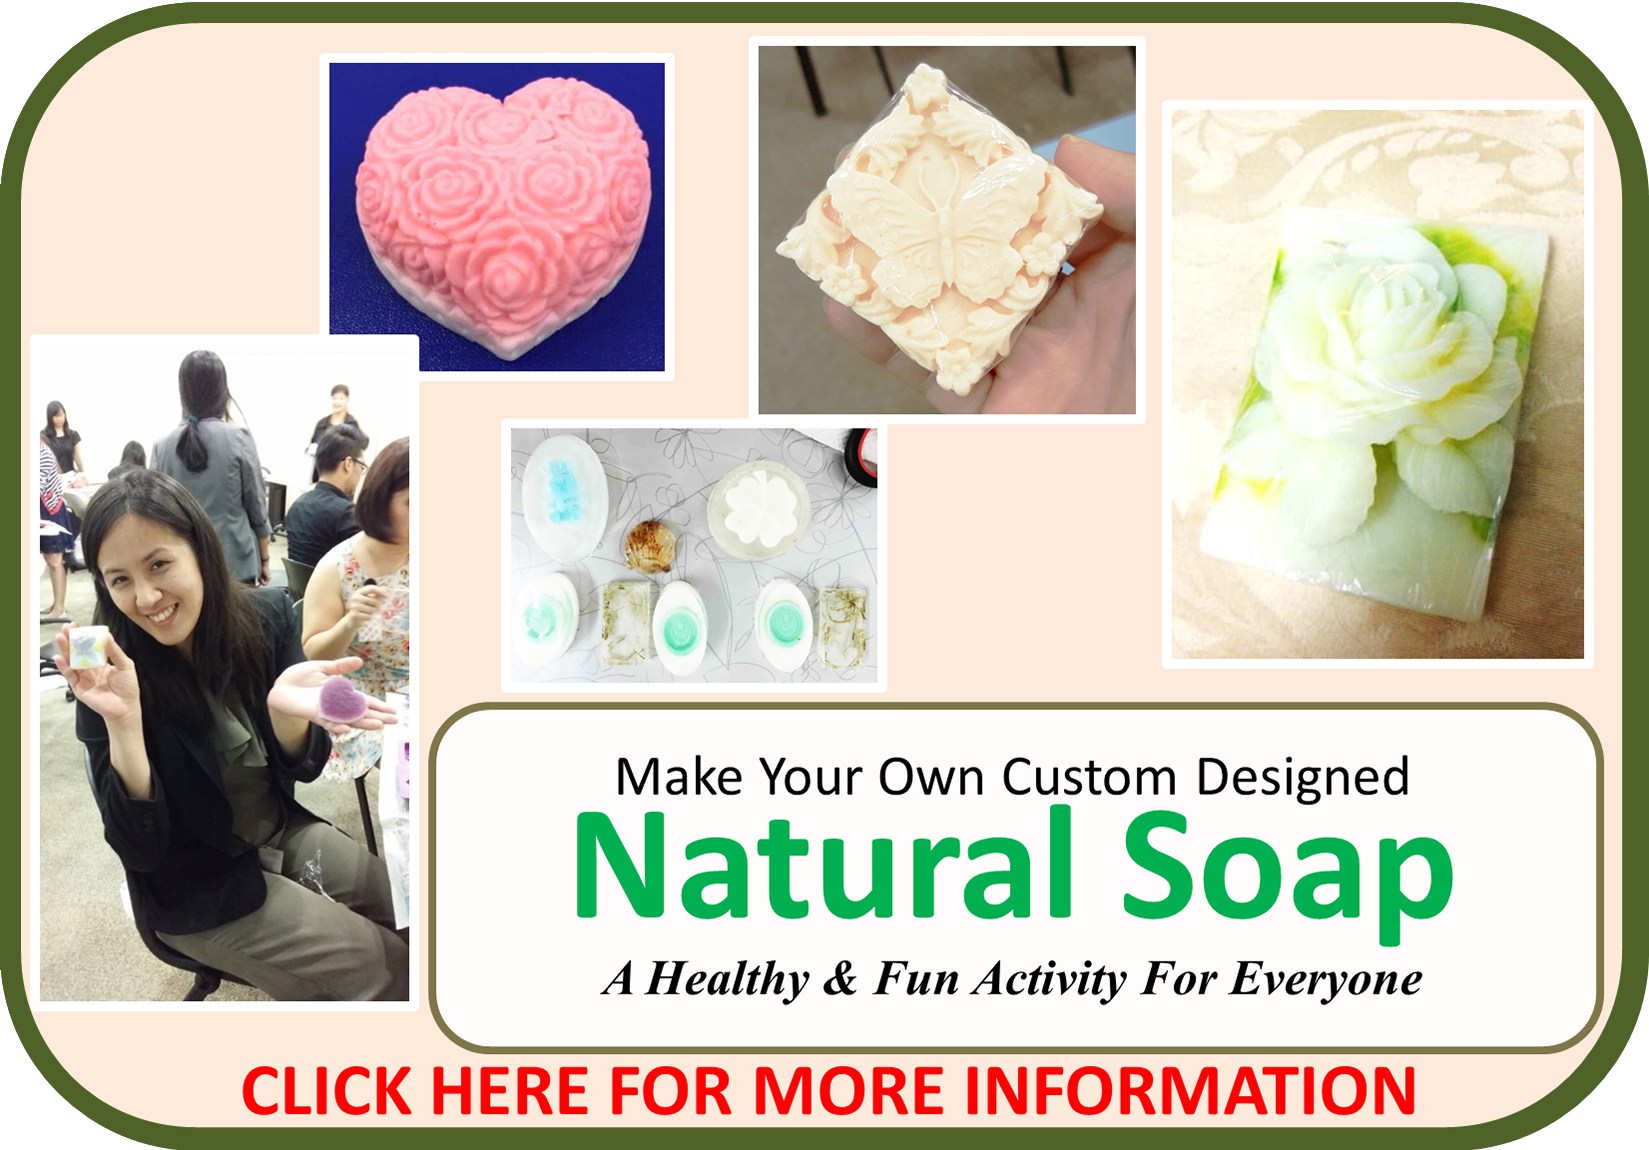 Make Your Own Natural Soap